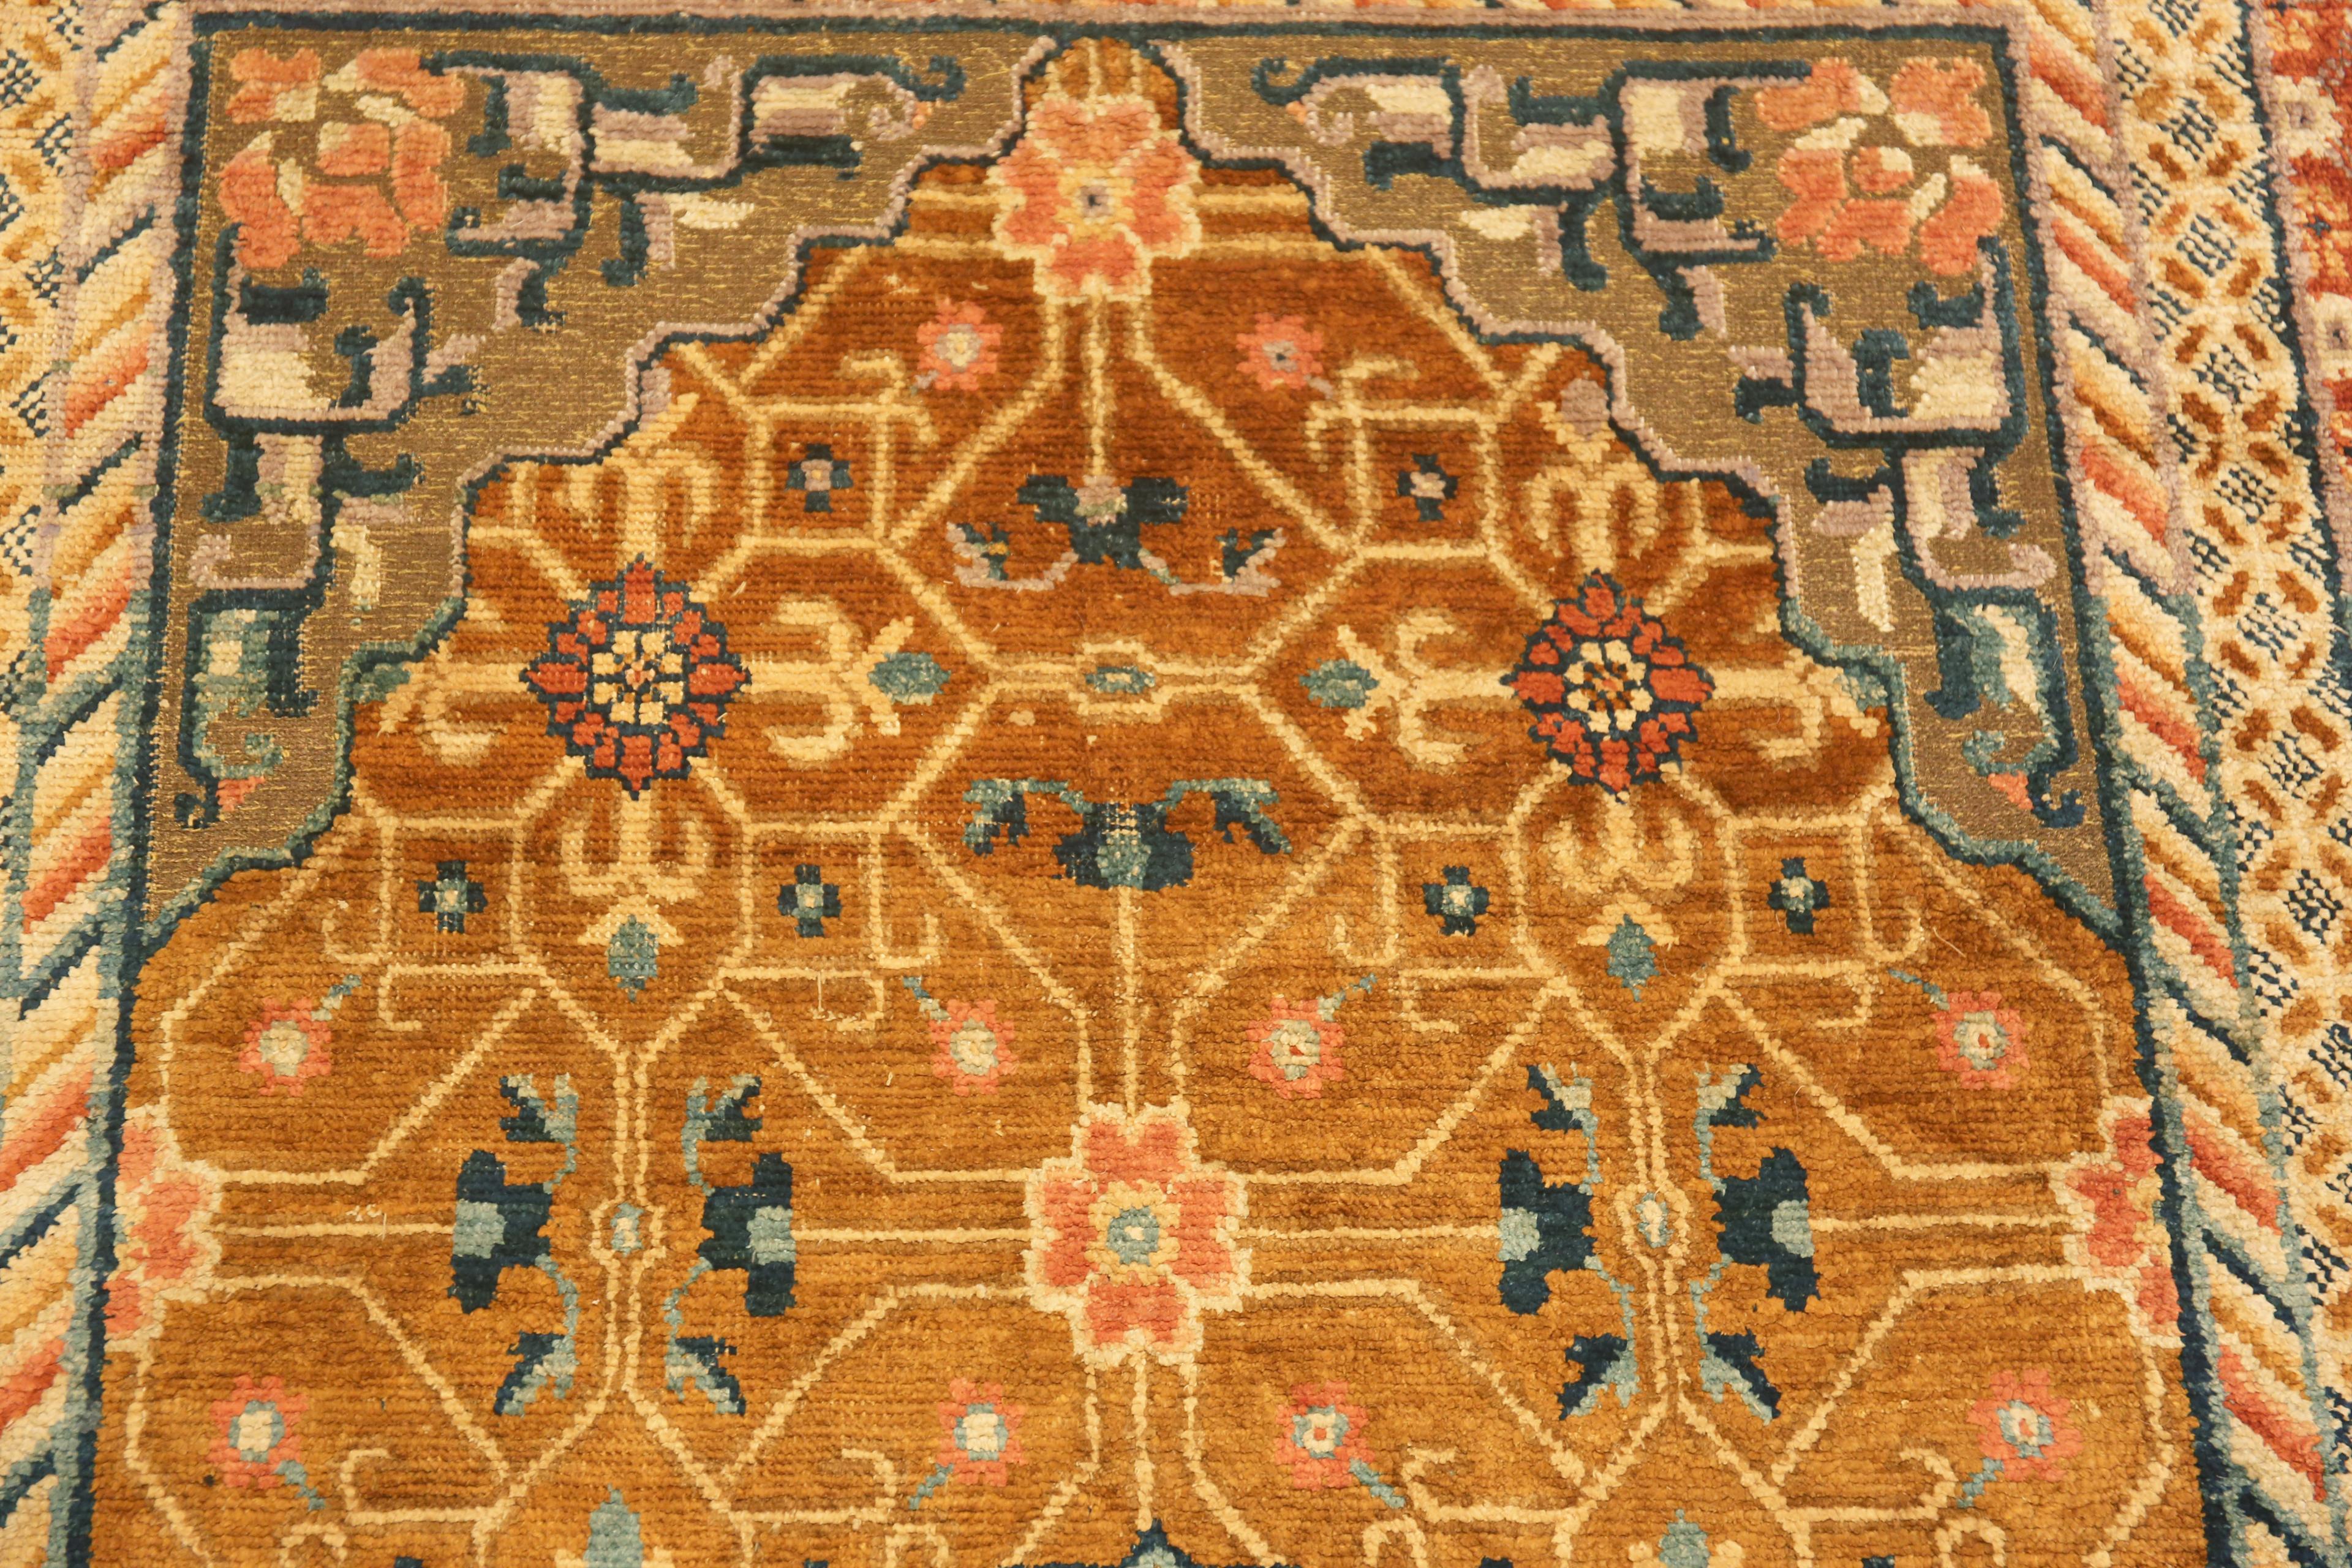 Truly Magnificent Rare and Collectible Antique Mid 19th Century Chinese Metallic and Silk Pile Rug, Country of Origin / Rug Type: Antique Chinese Rug, Circa Date: Mid 19th Century Rug